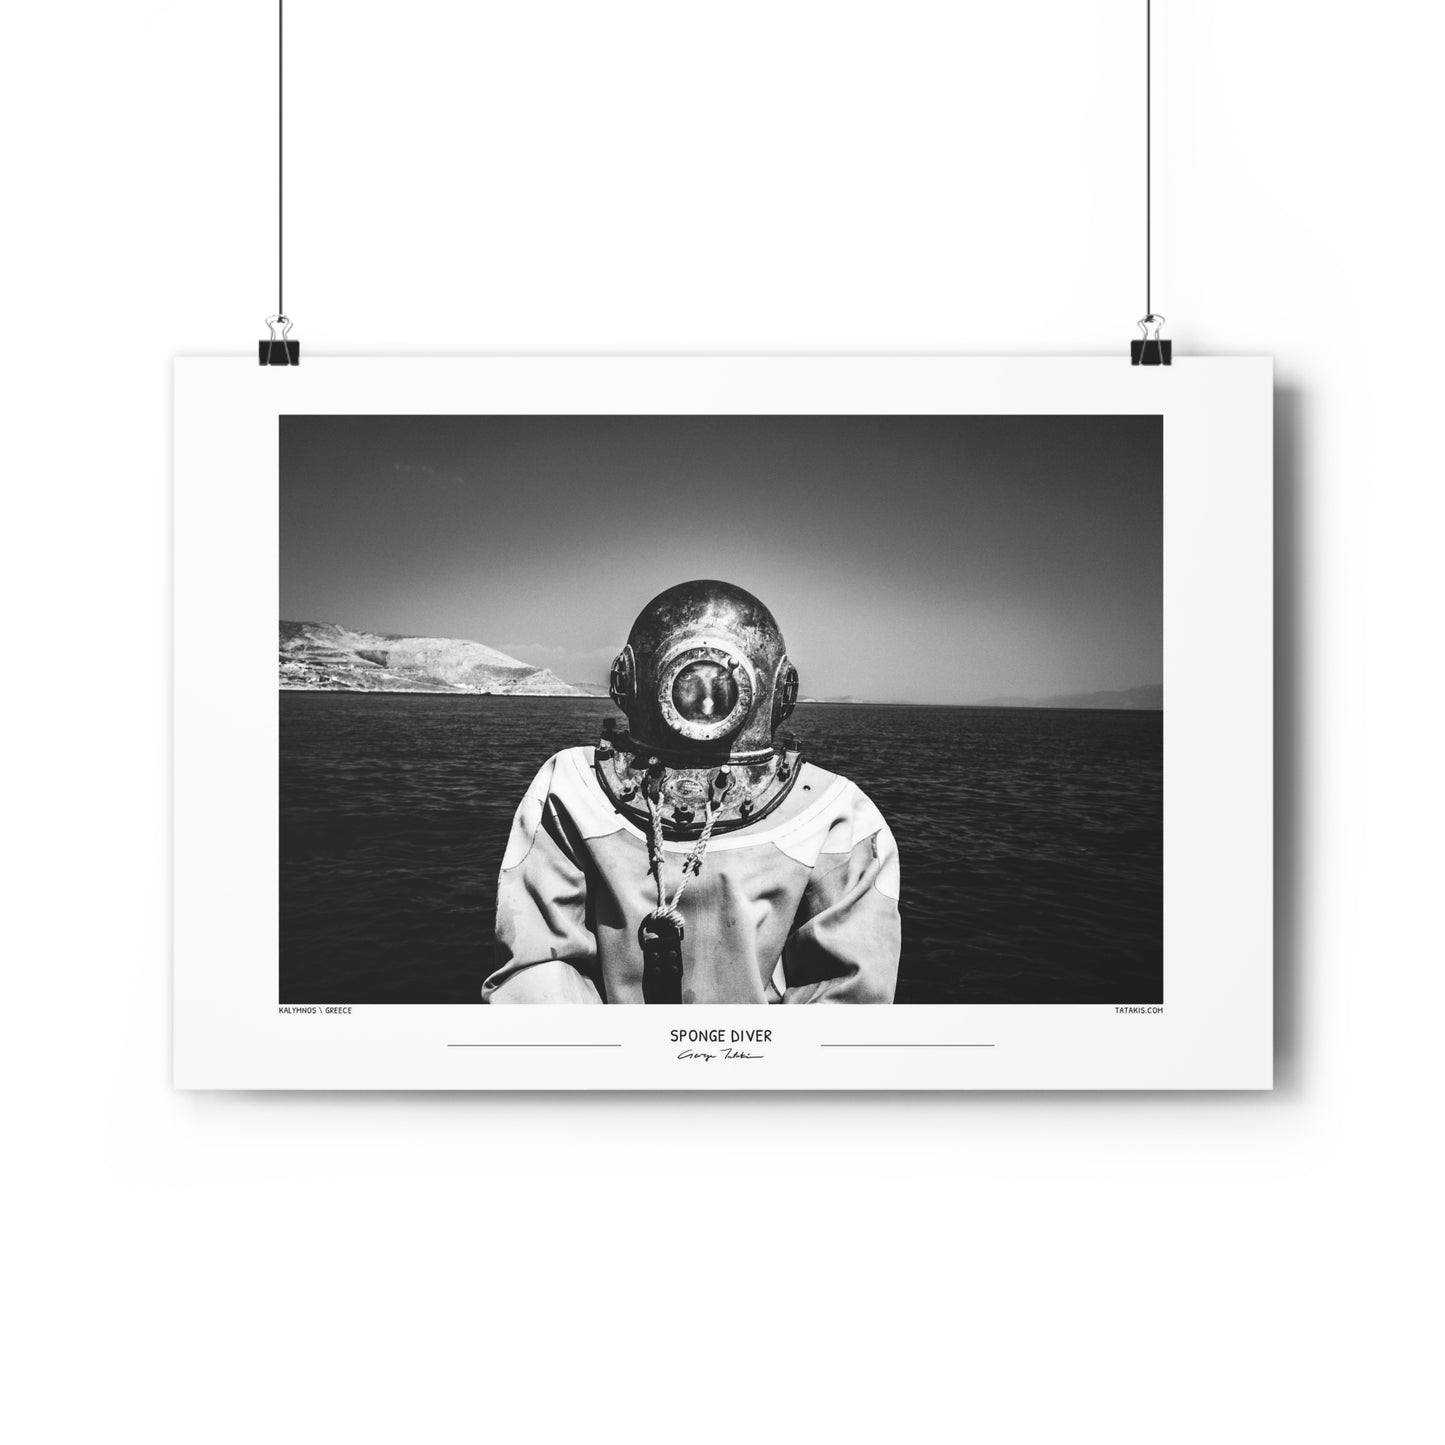 The Sponge Diver | Black-and-White photography Wall Art Poster from Greece, by George Tatakis - hanging poster